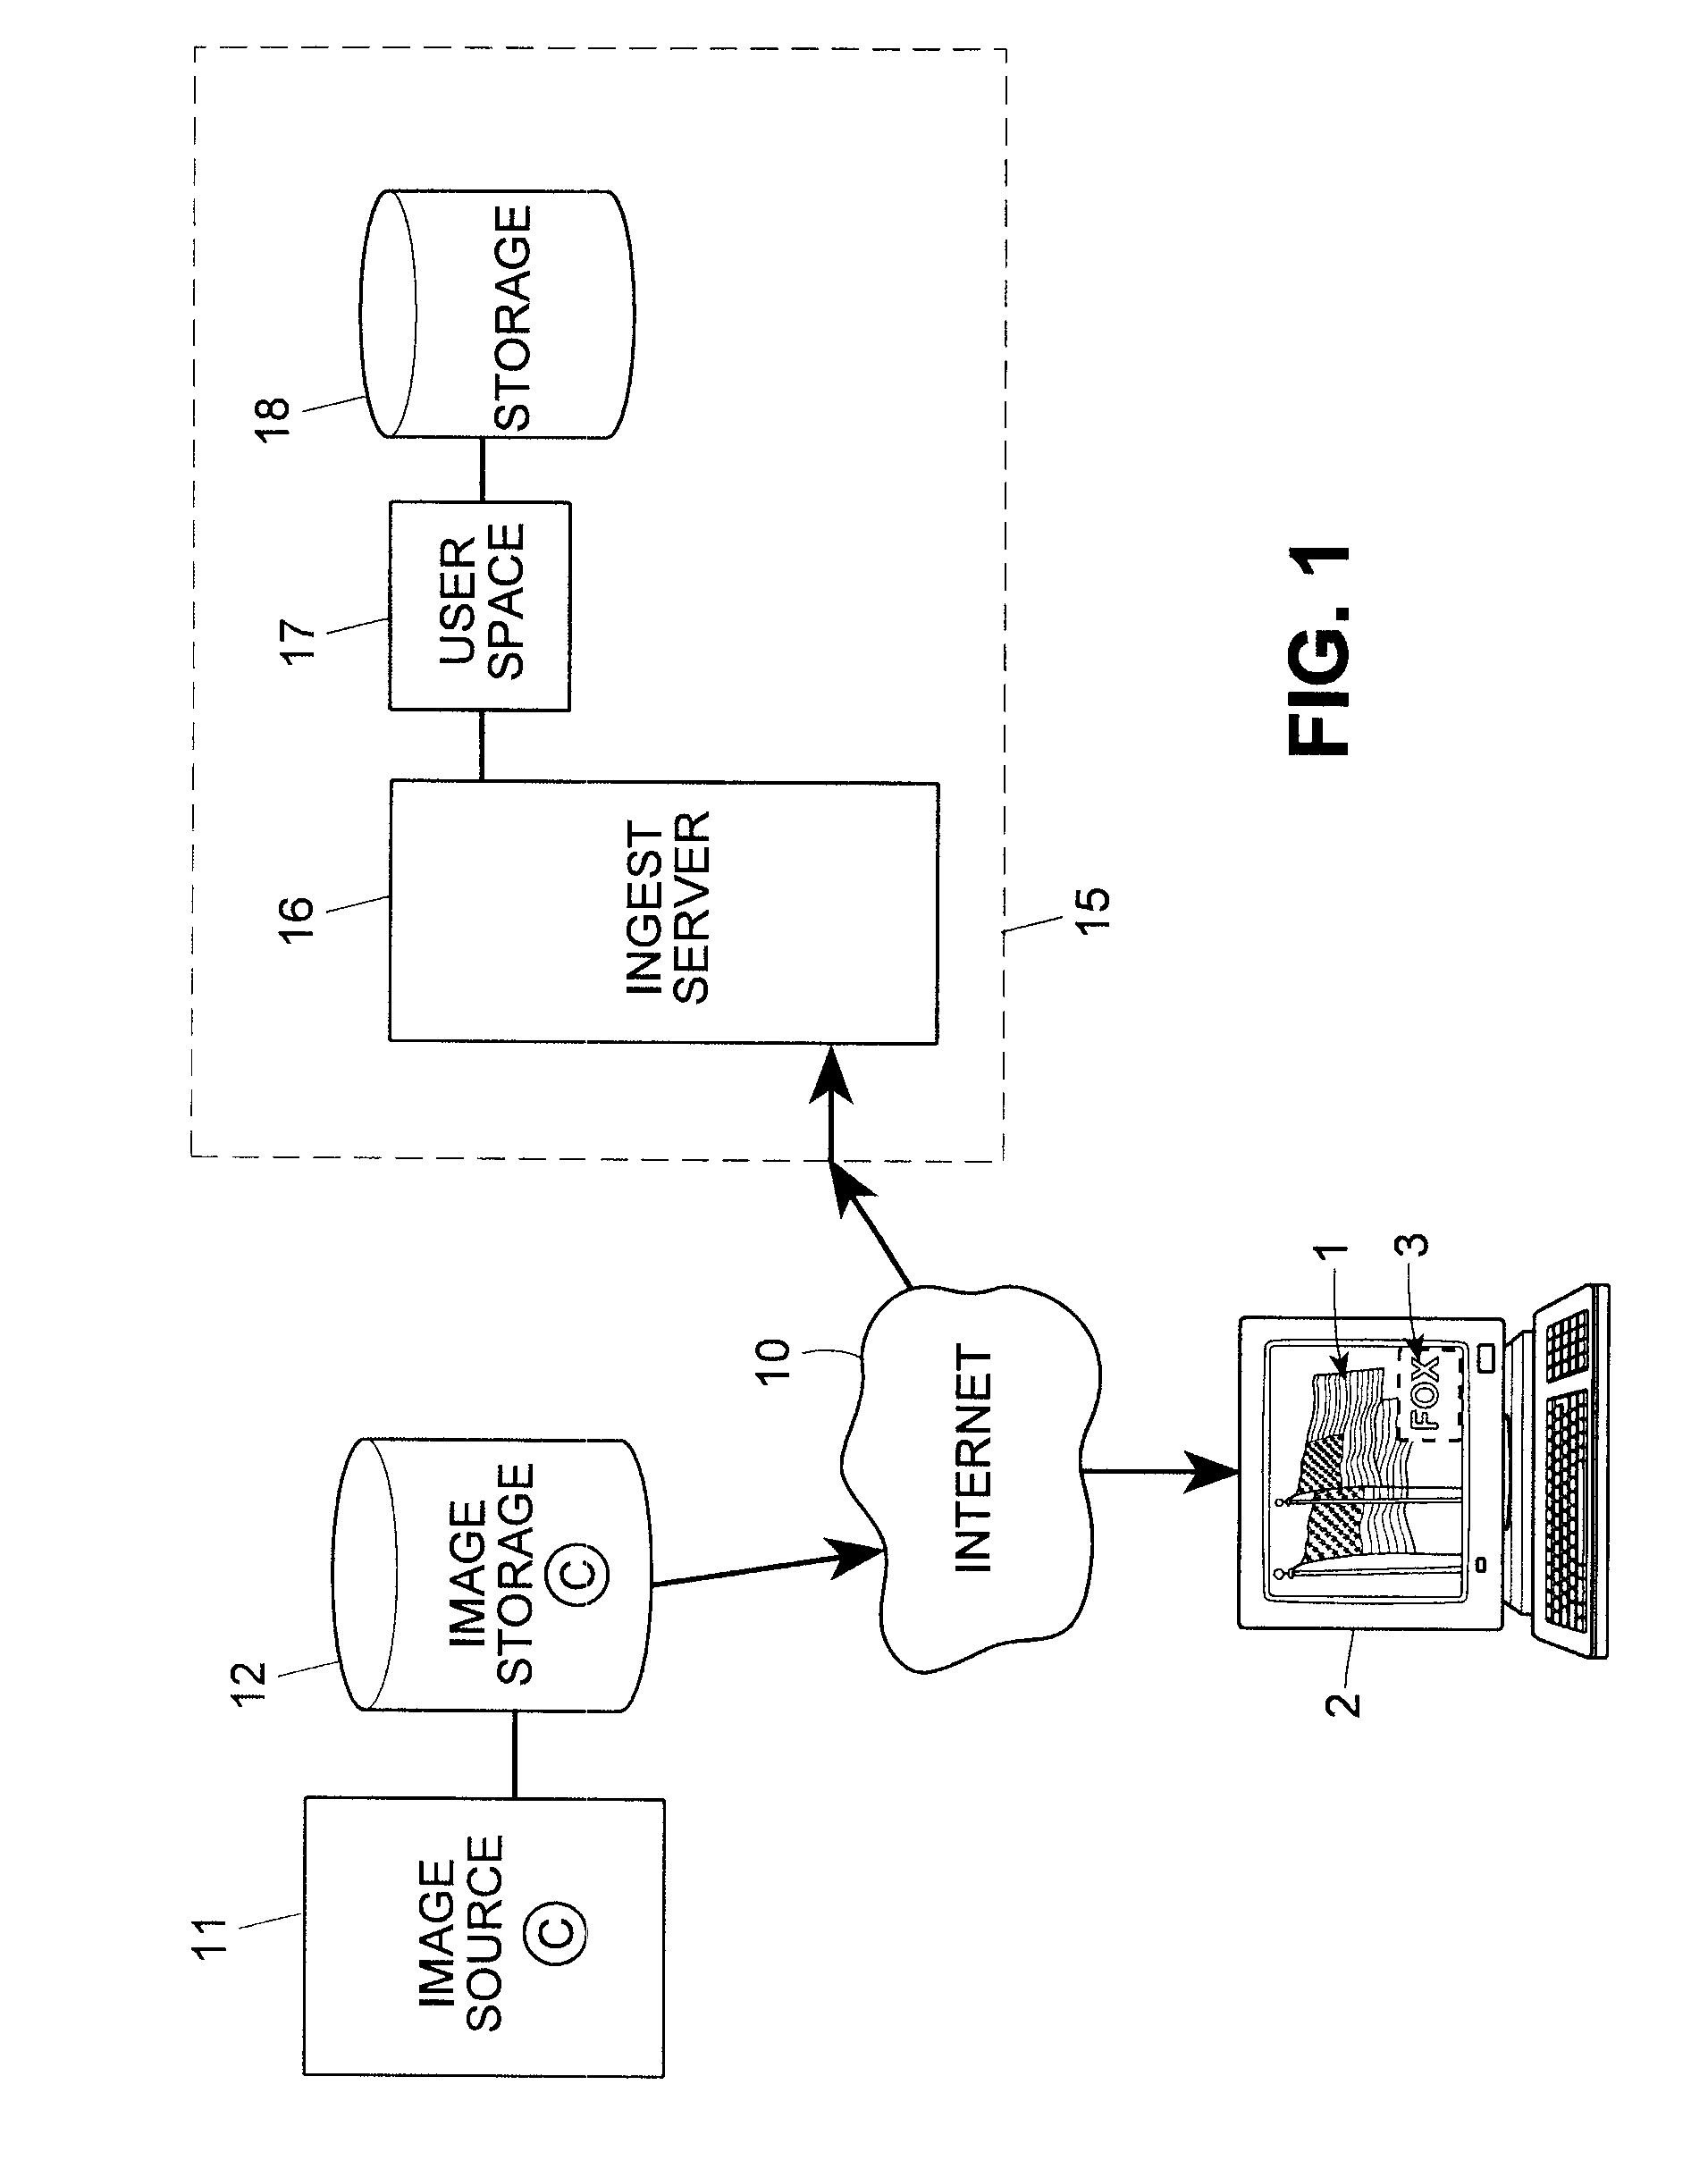 System and method for detecting the source of media content with application to business rules